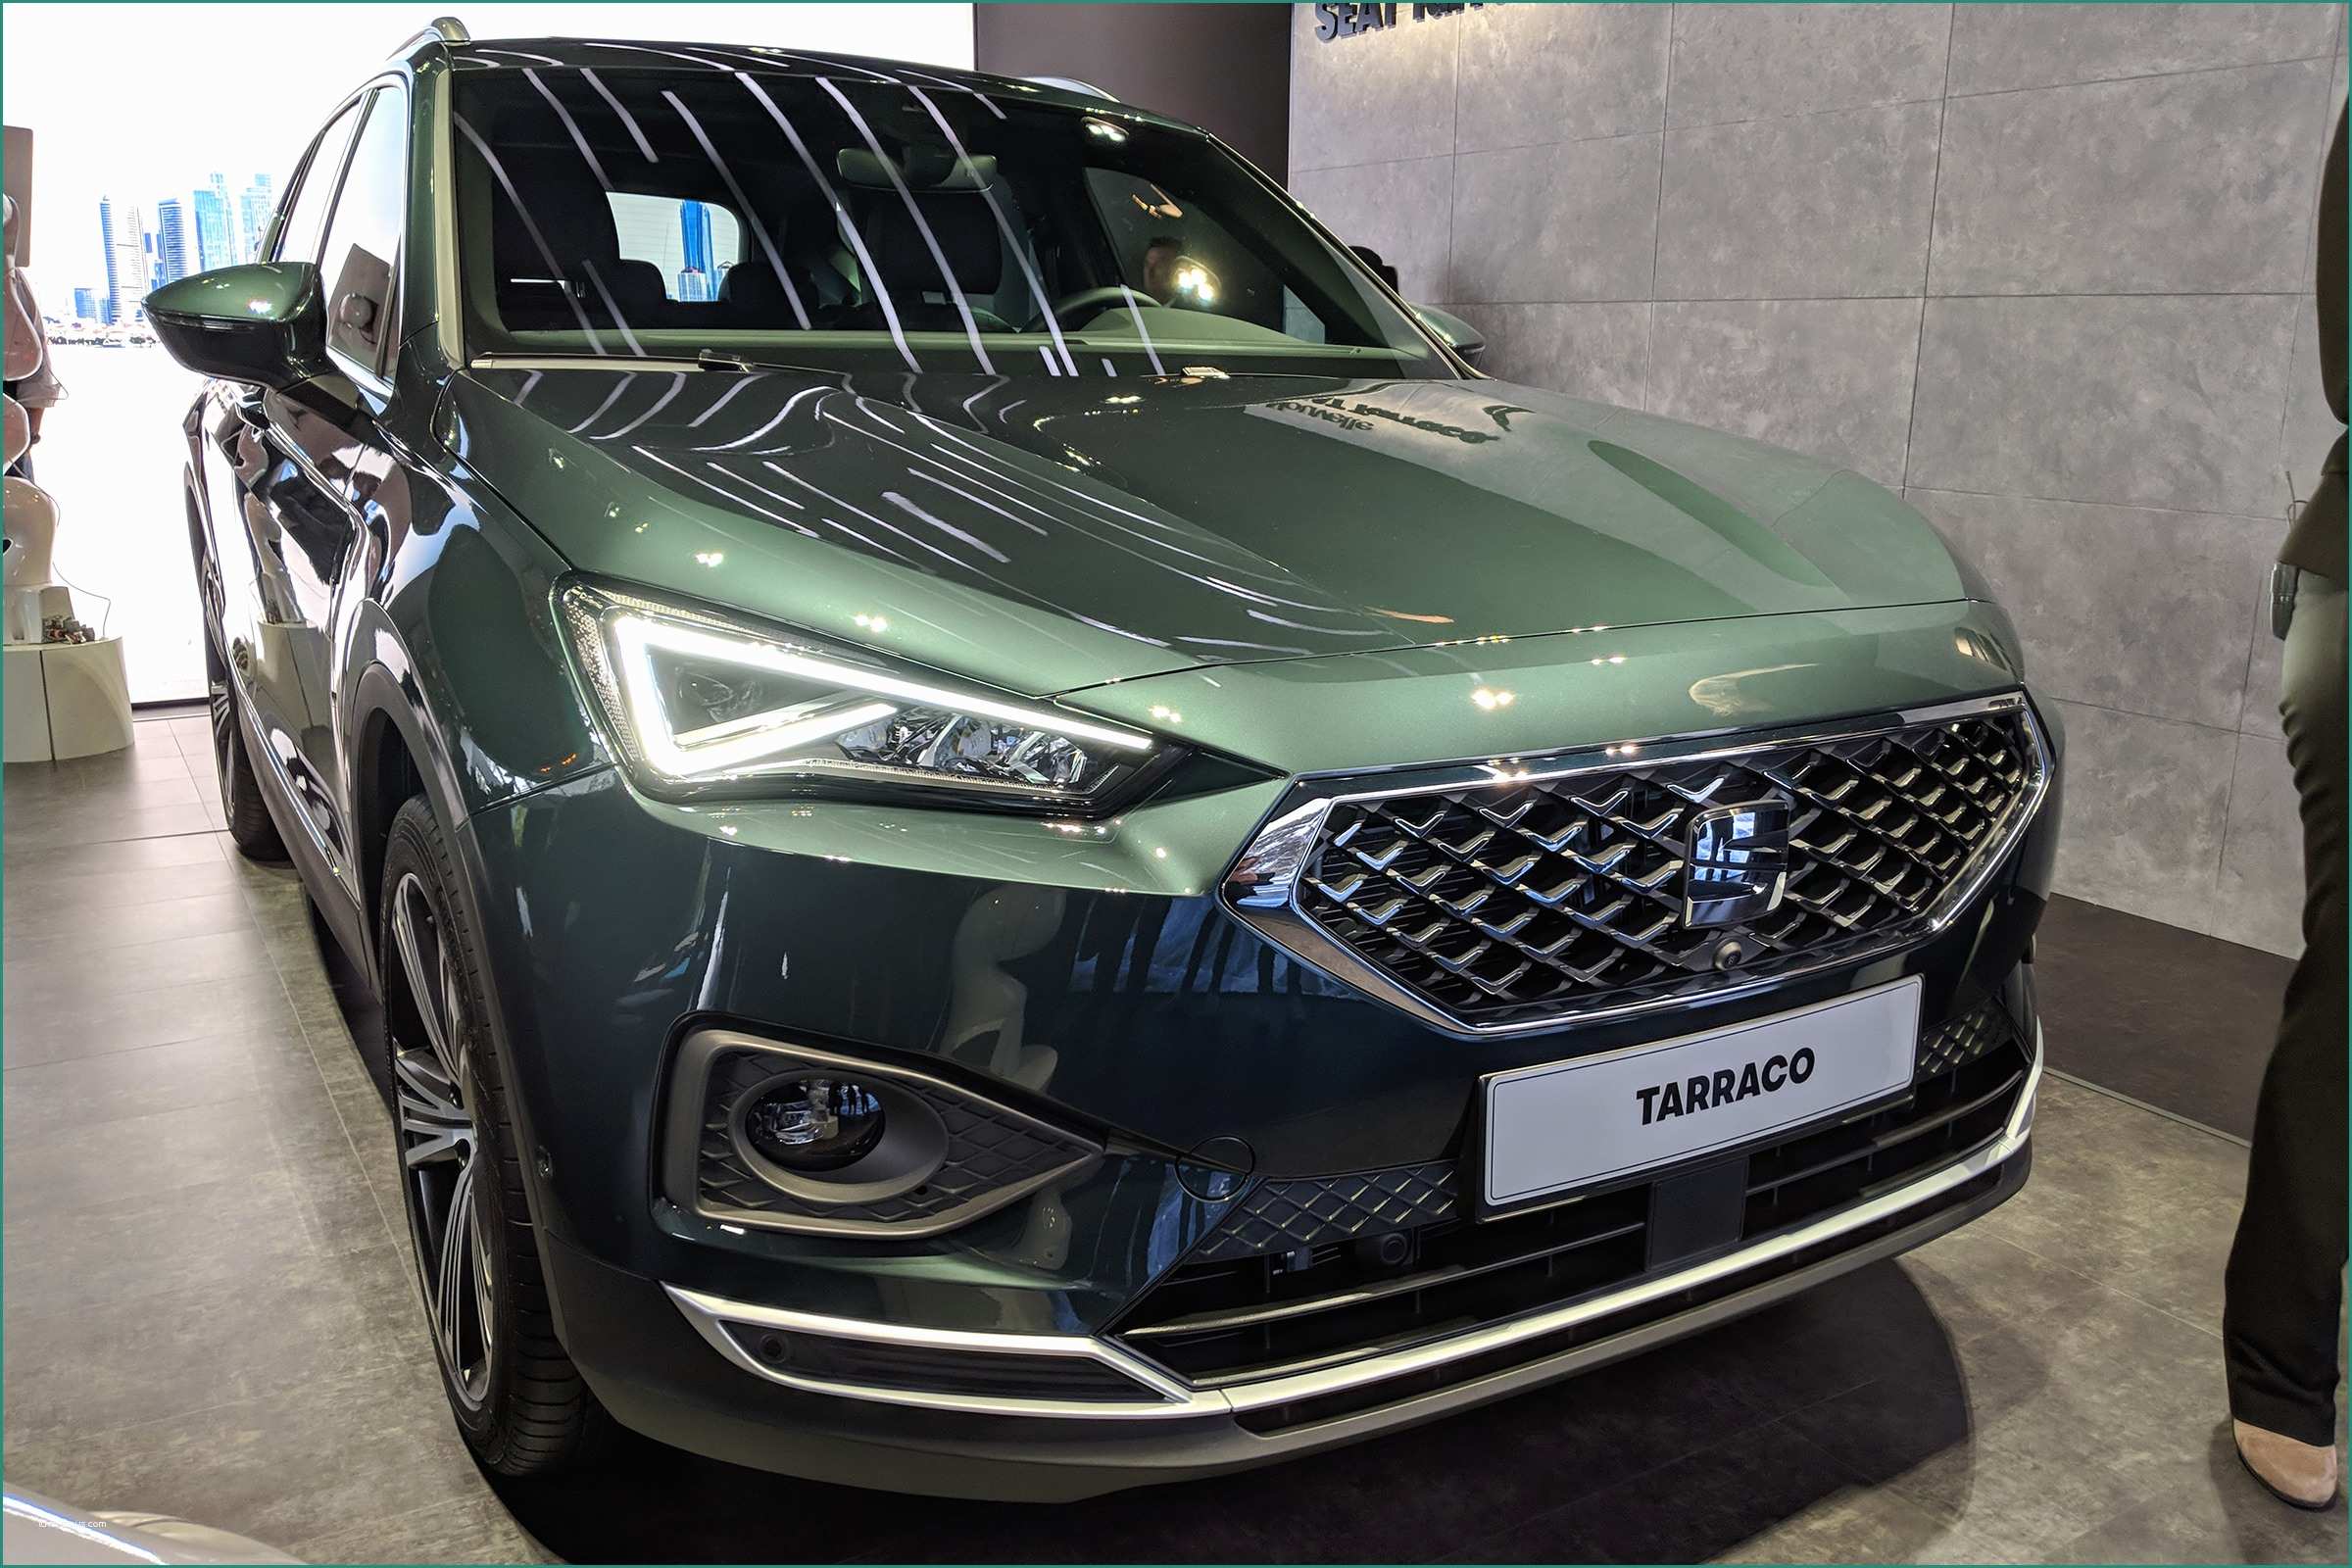 Dimensioni Golf Variant E New Range topping 2018 Seat Tarraco Suv Revealed In Paris